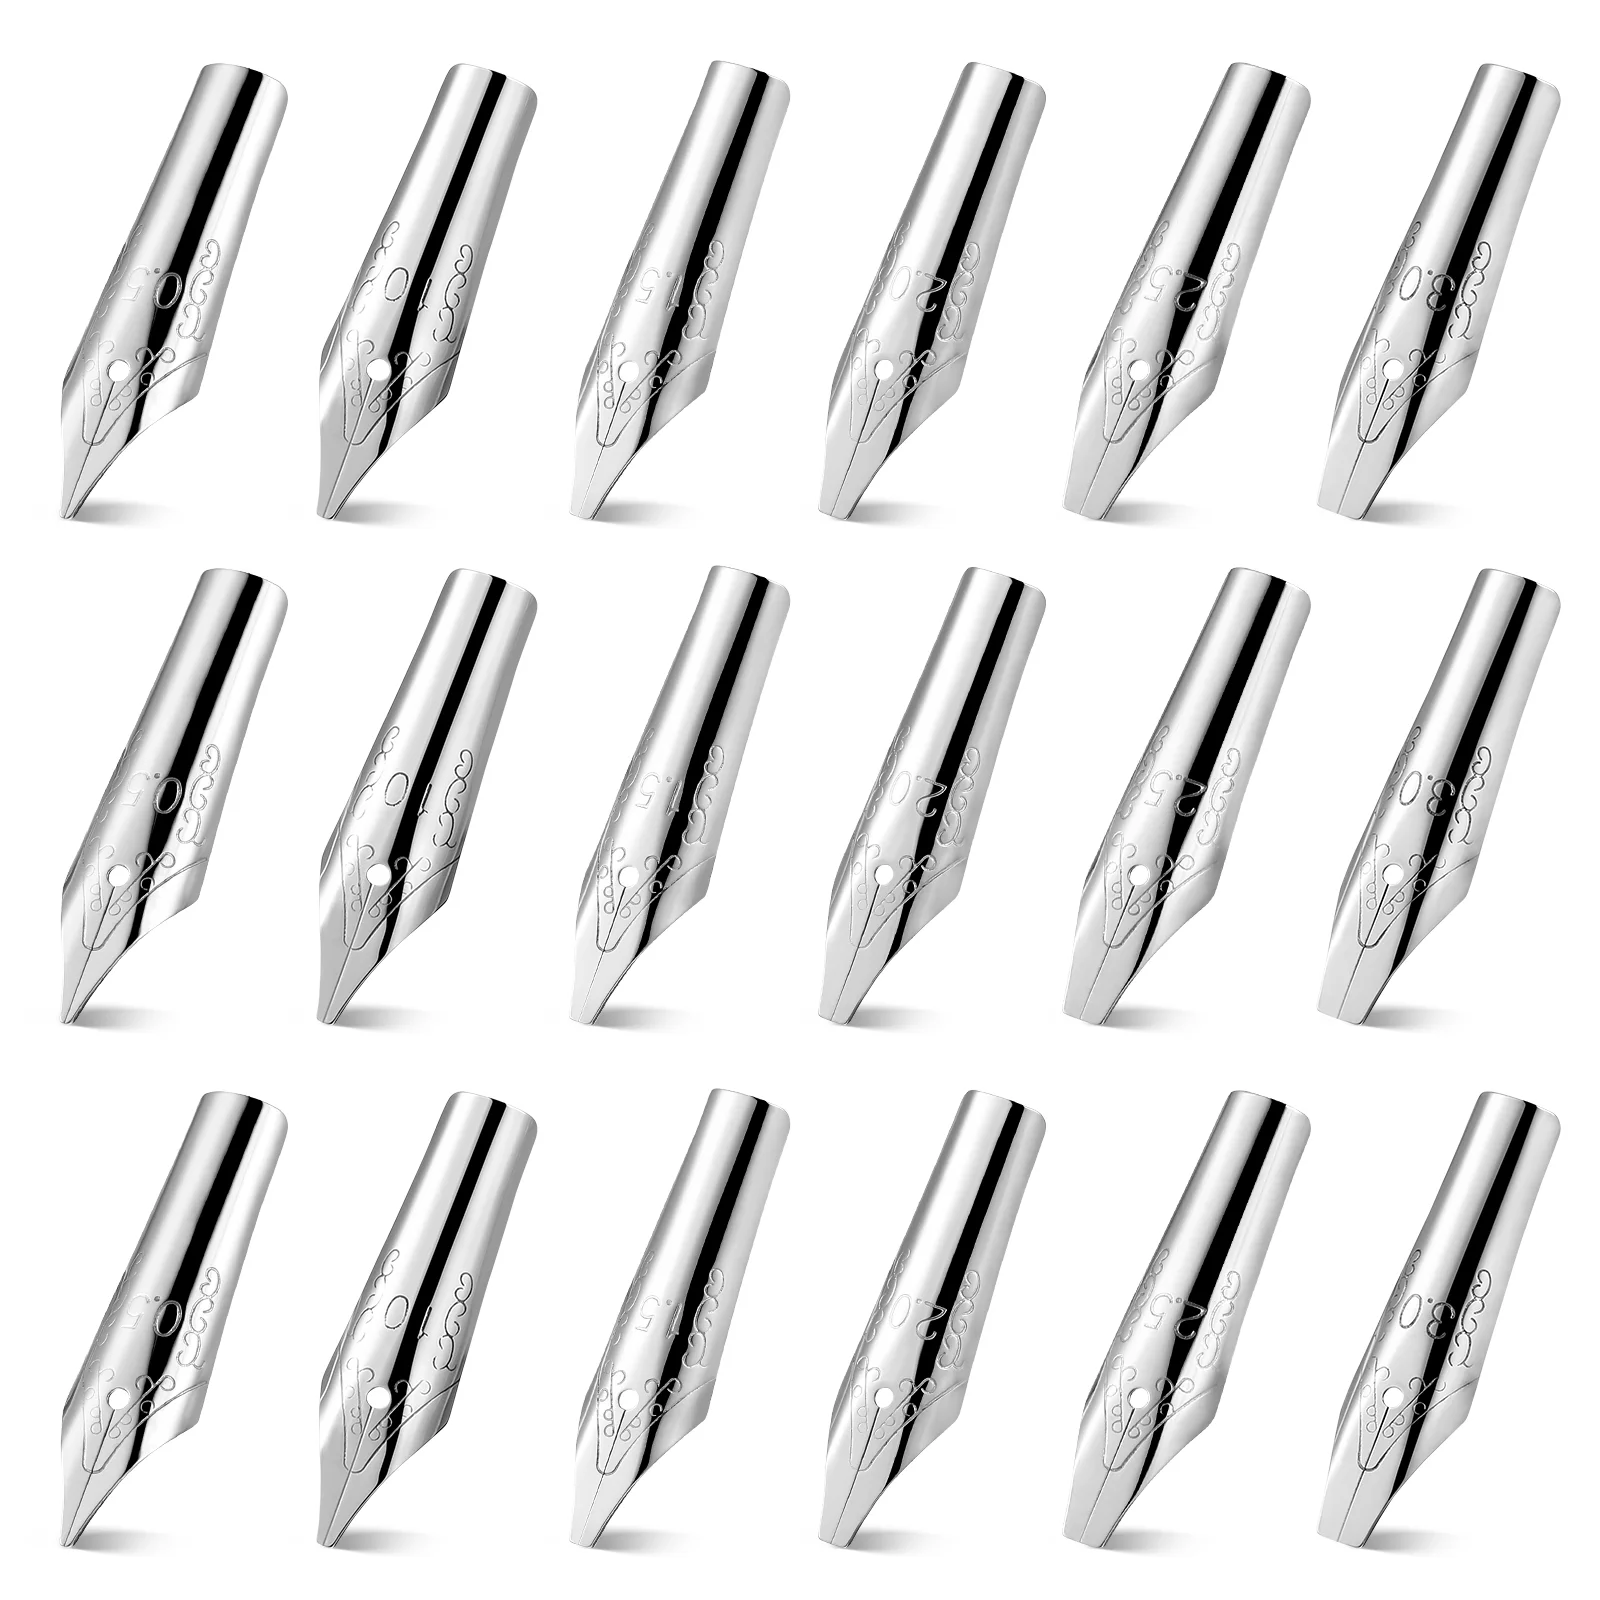 

30 Pcs Fountain Pen Nibs Stainless Steel Pen Nibs Fountain Pen Replacement Nibs Writing Signing Calligraphy Pen Nib Set